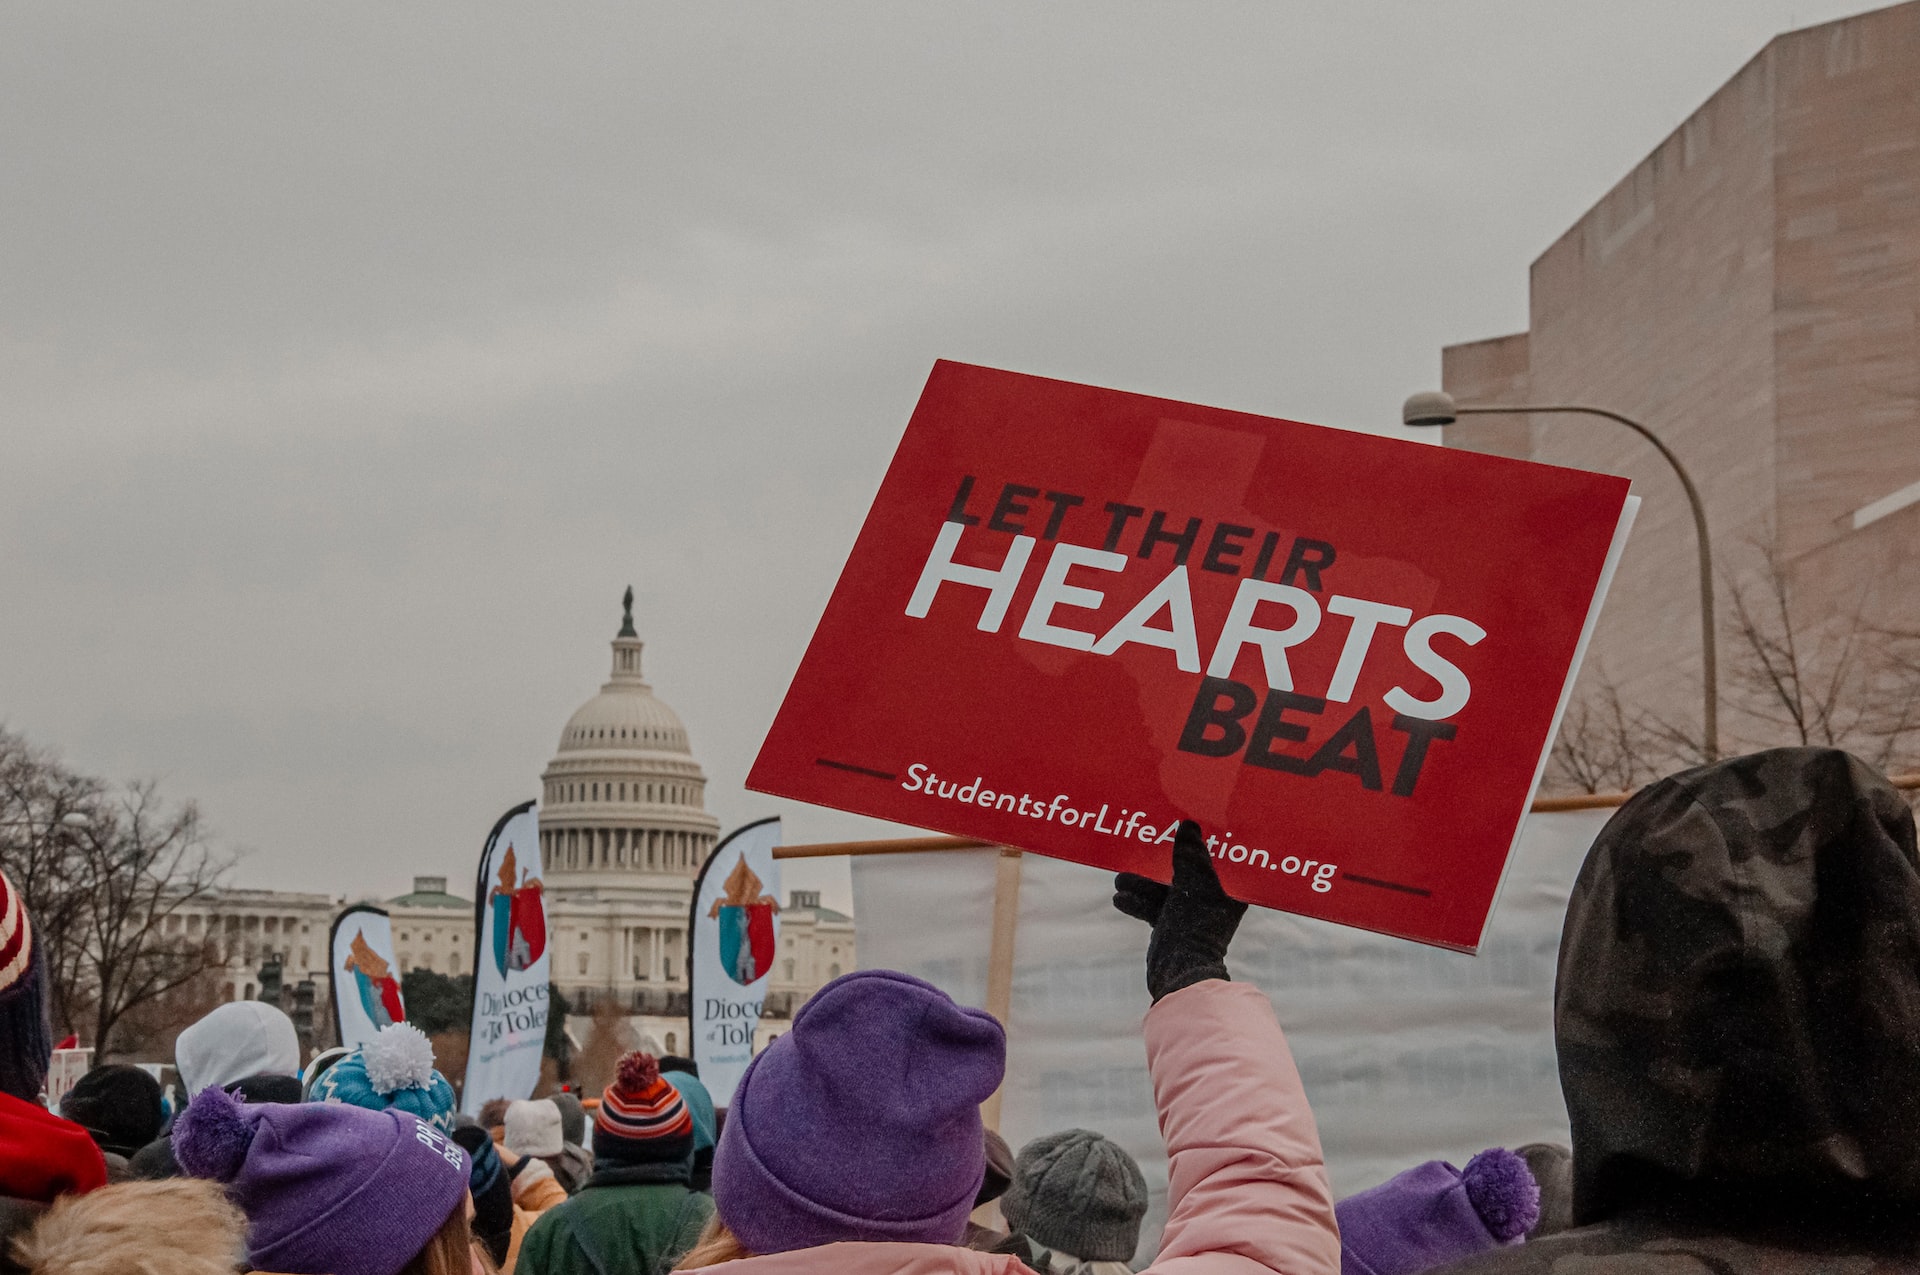 An anti-abortion rally near the Capitol in Washington D.C., with a placard that says ‘Let Their Hearts Beat’